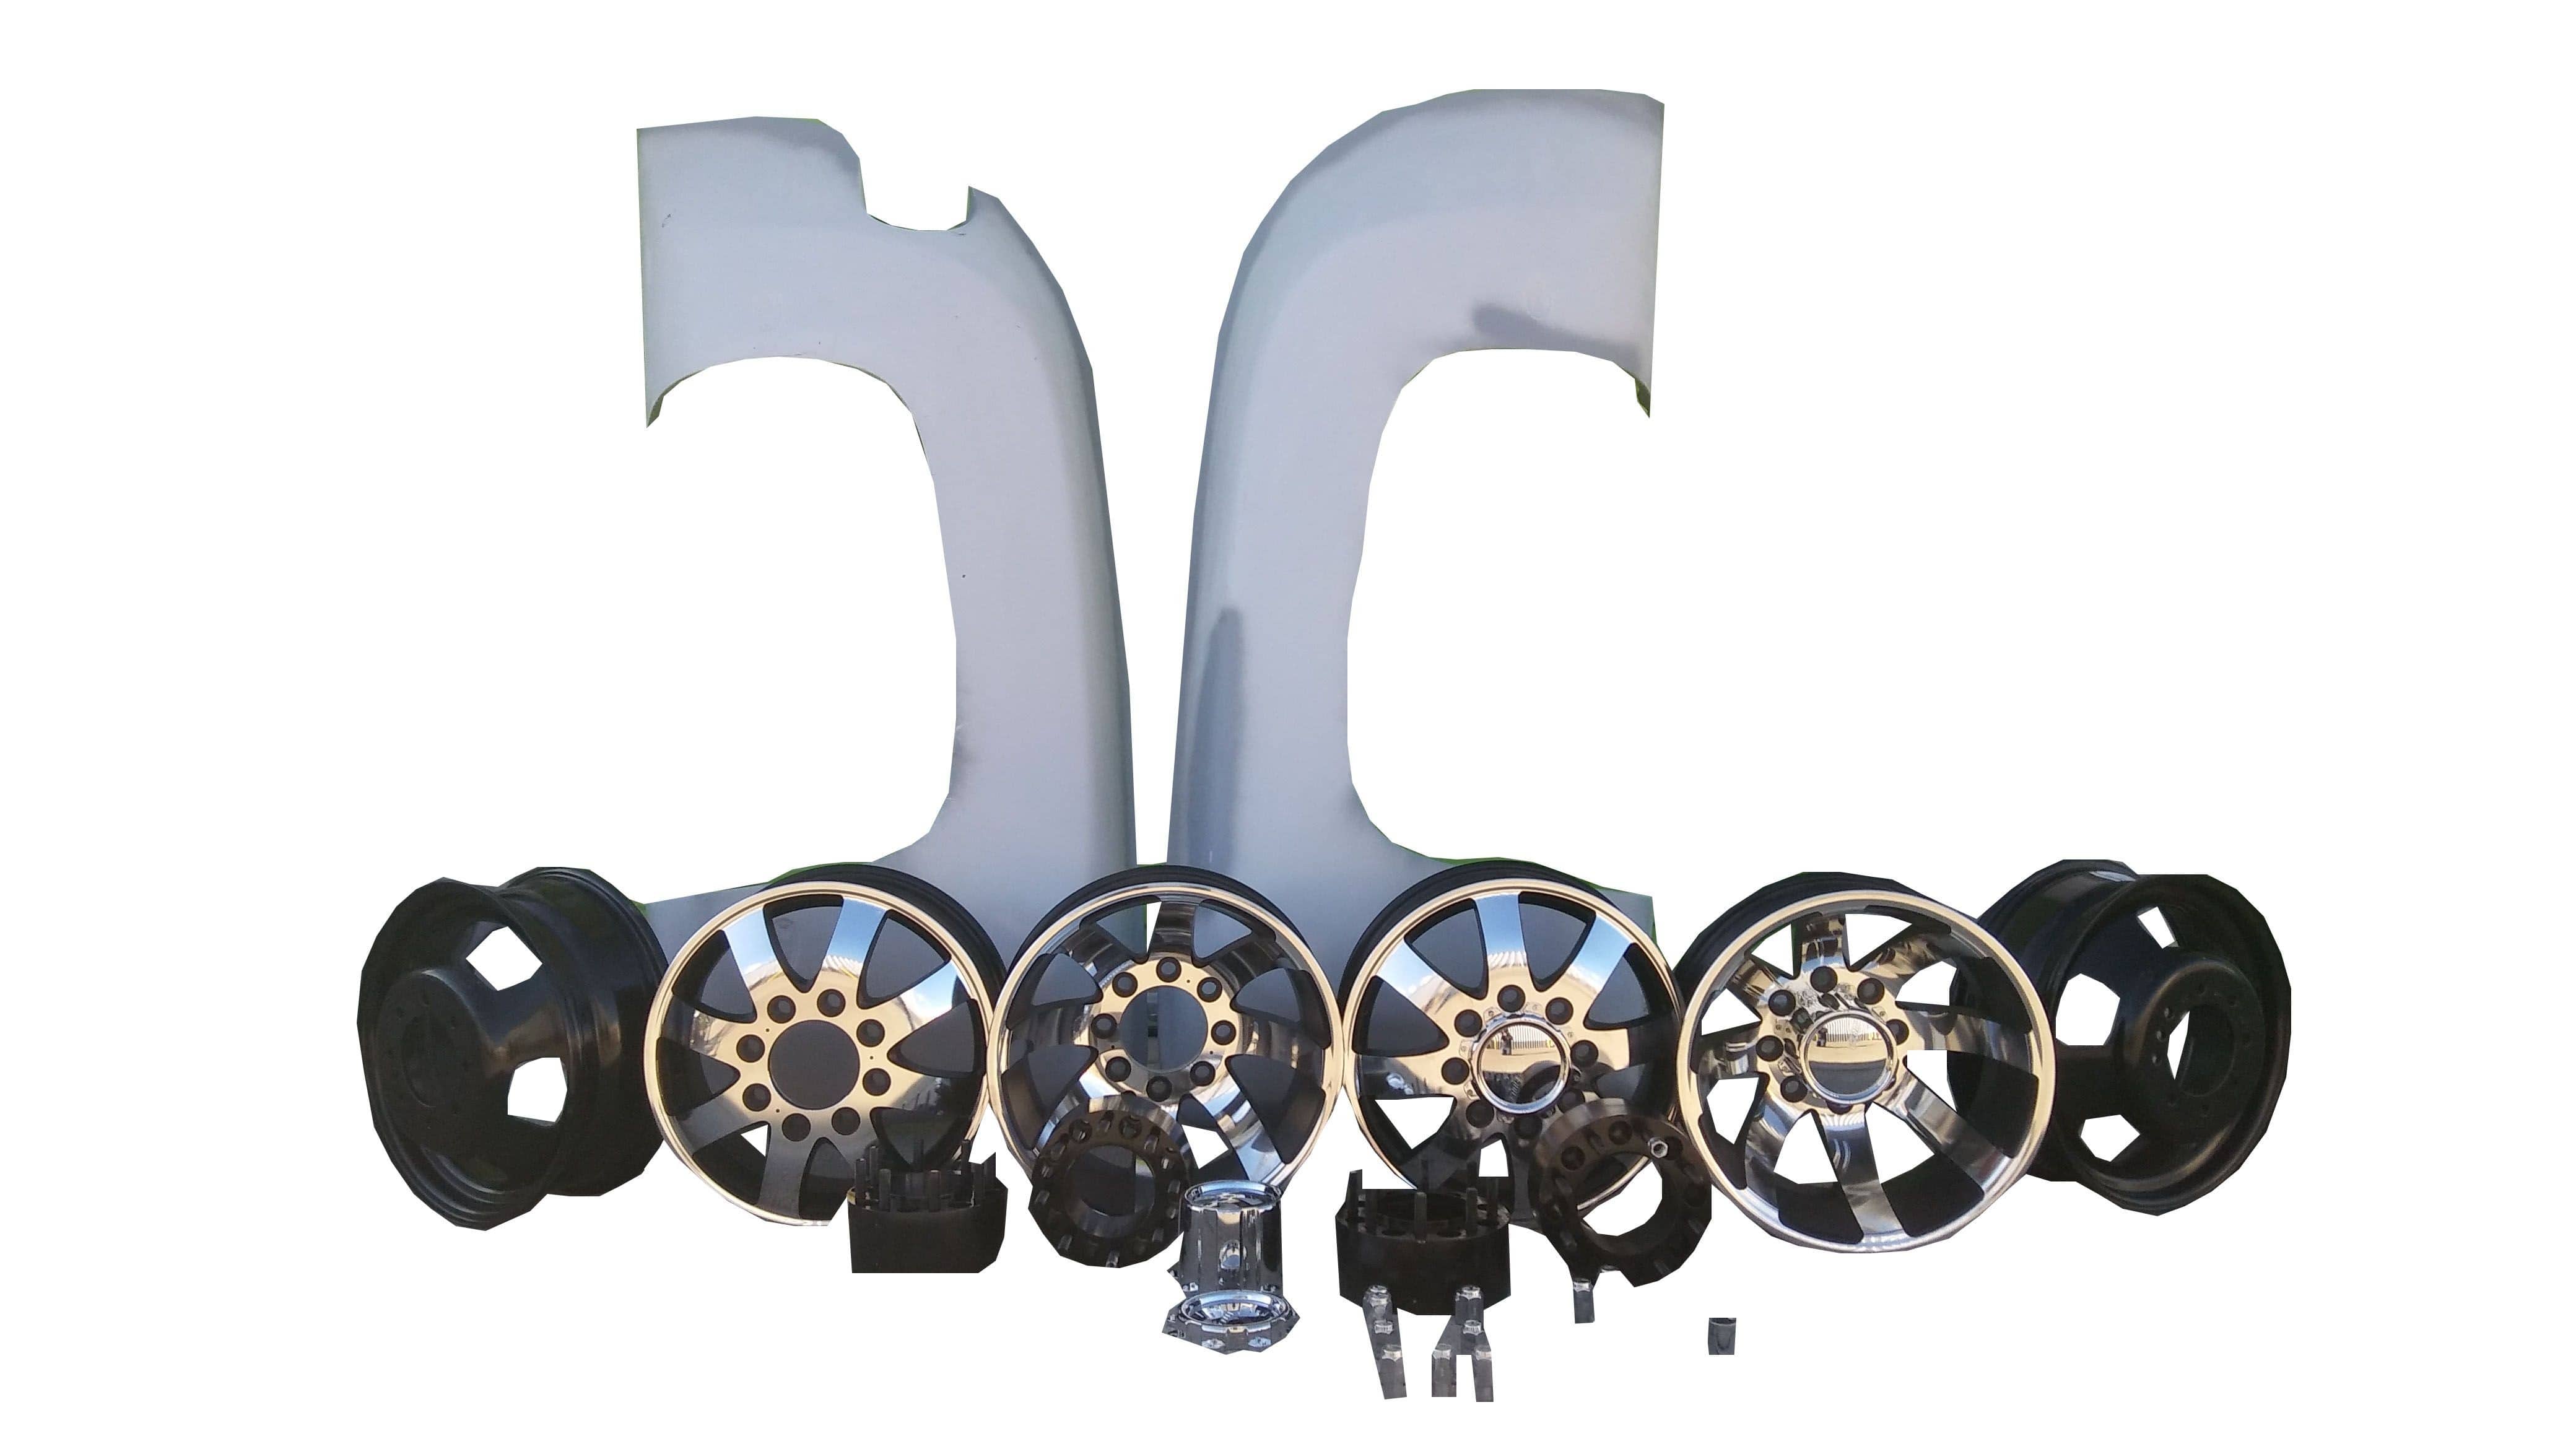 chevy/gmc dually conversion kits 1988-1999.
6 chevy dually wheels machinest4 chevy dually adapters .
2 rdear dually fenders long and short bed.